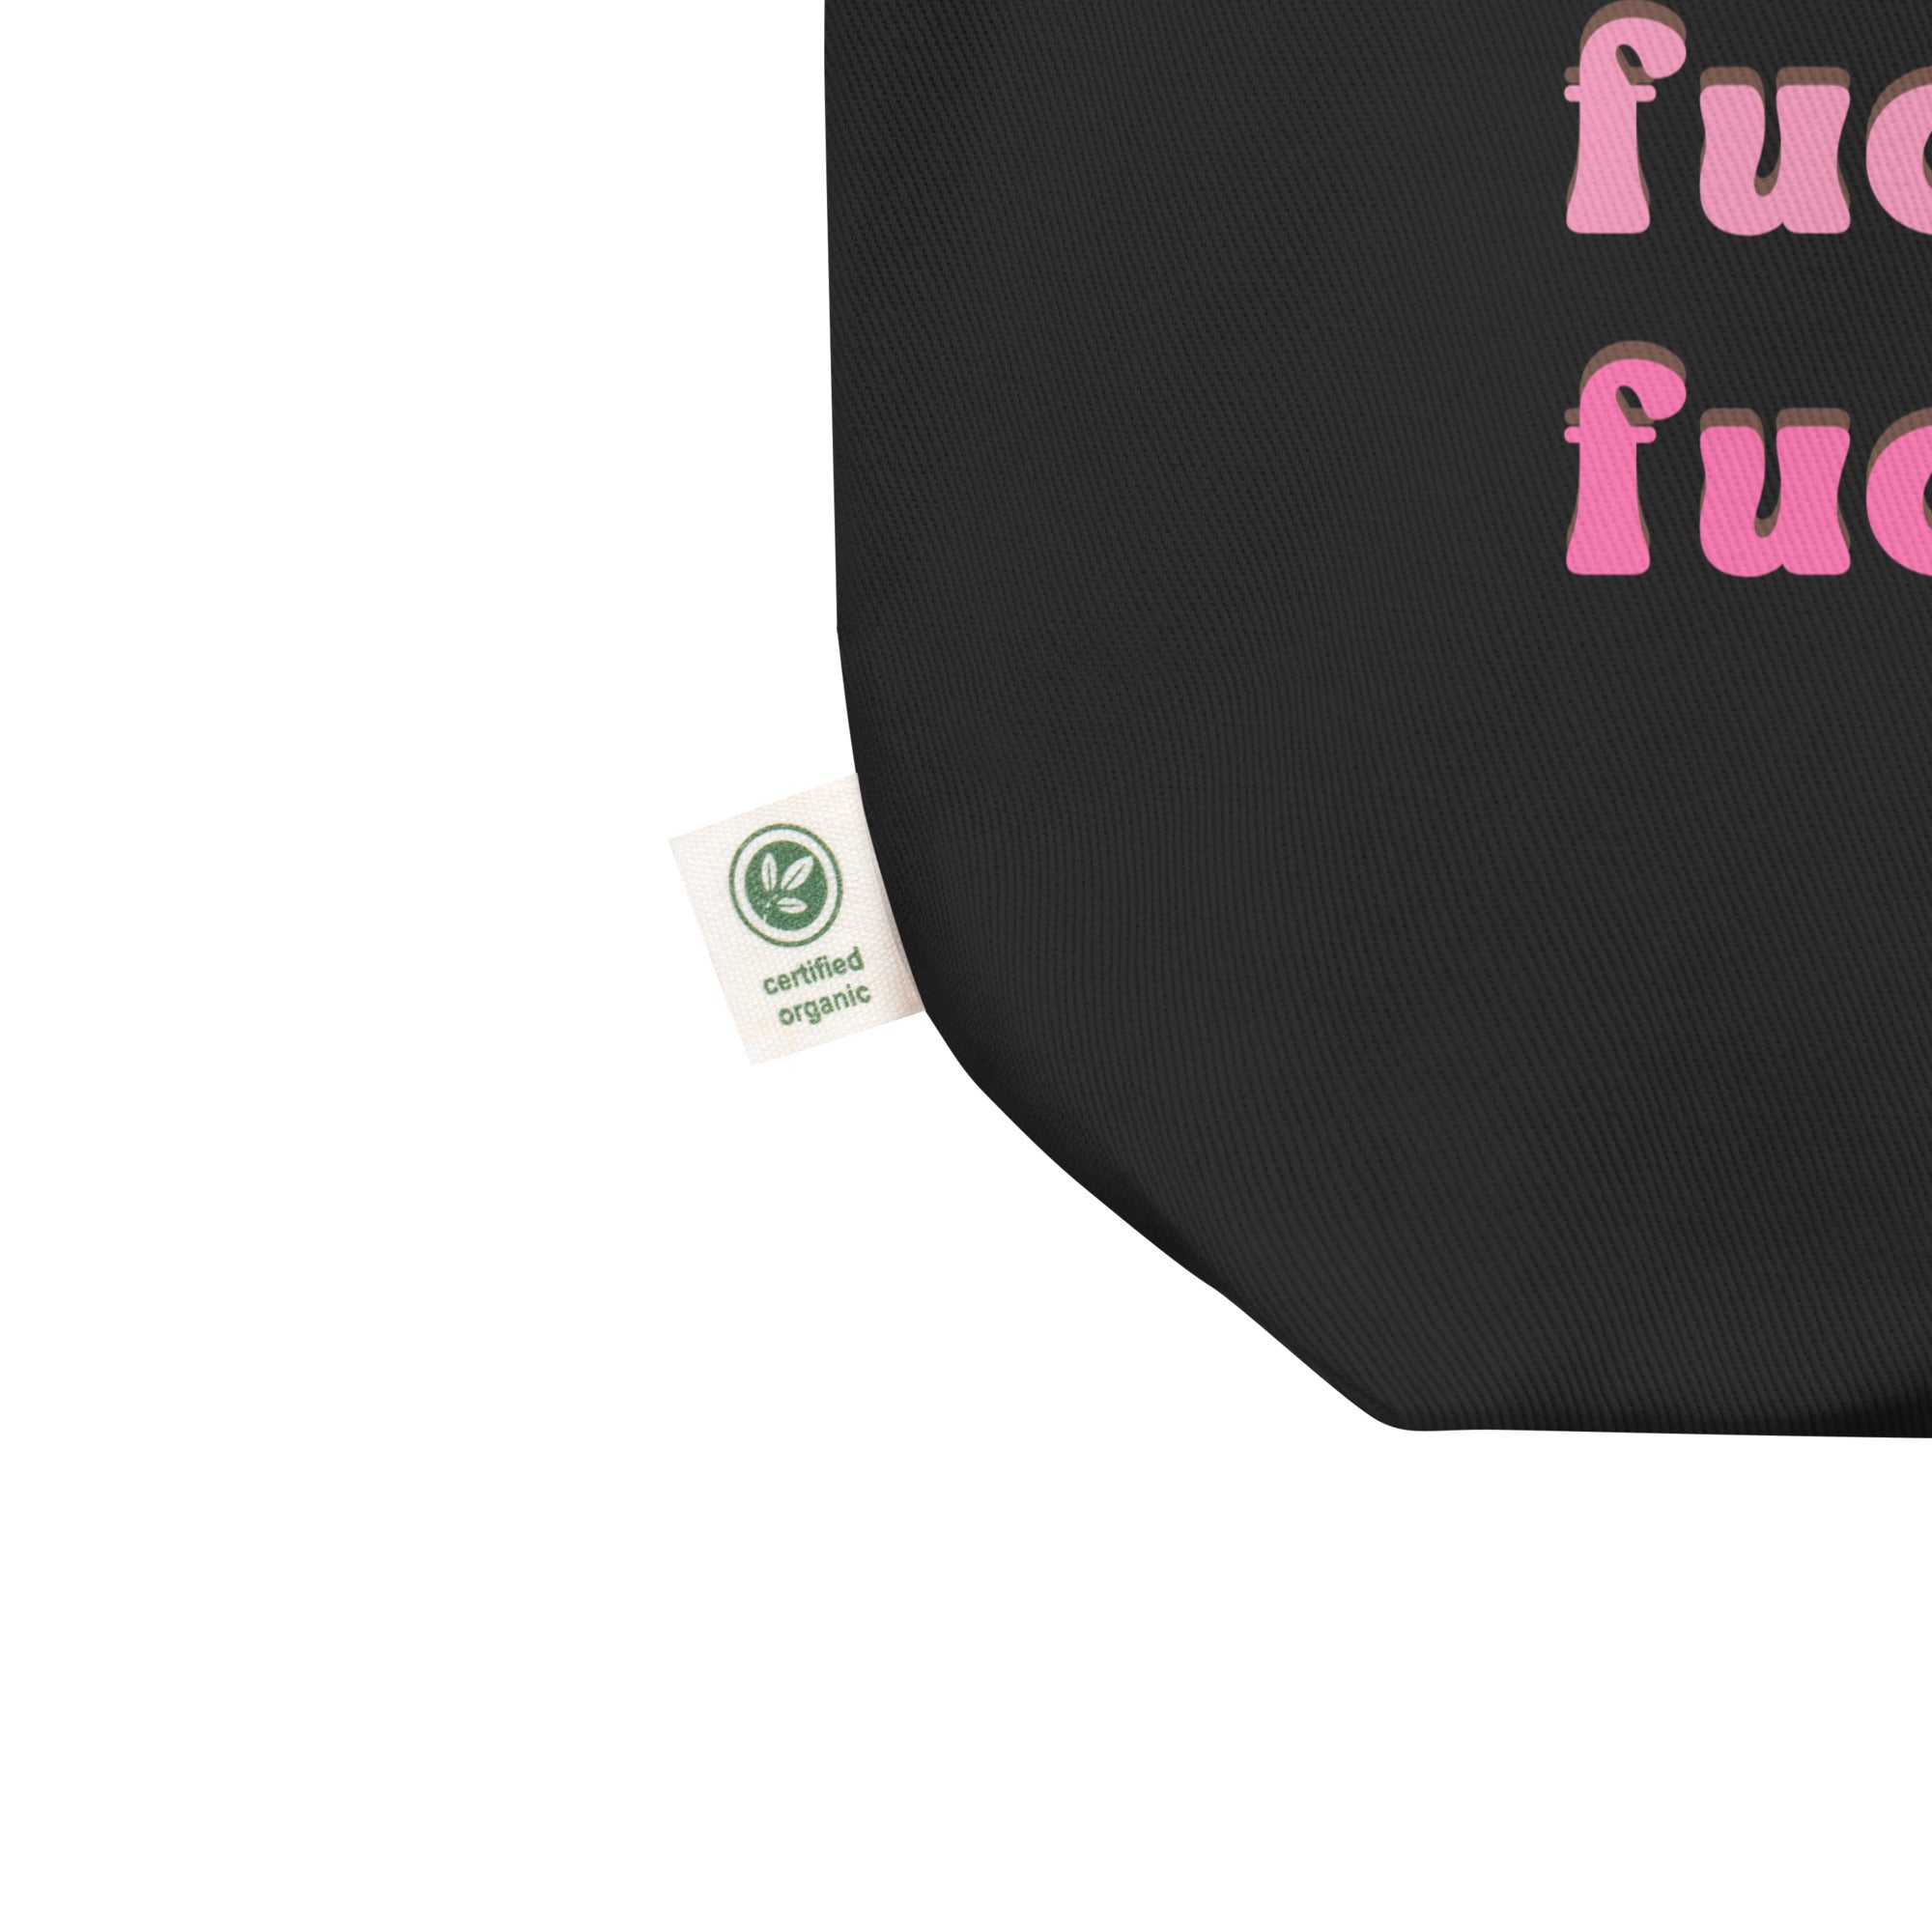 Fuck Cancer Tote Bag